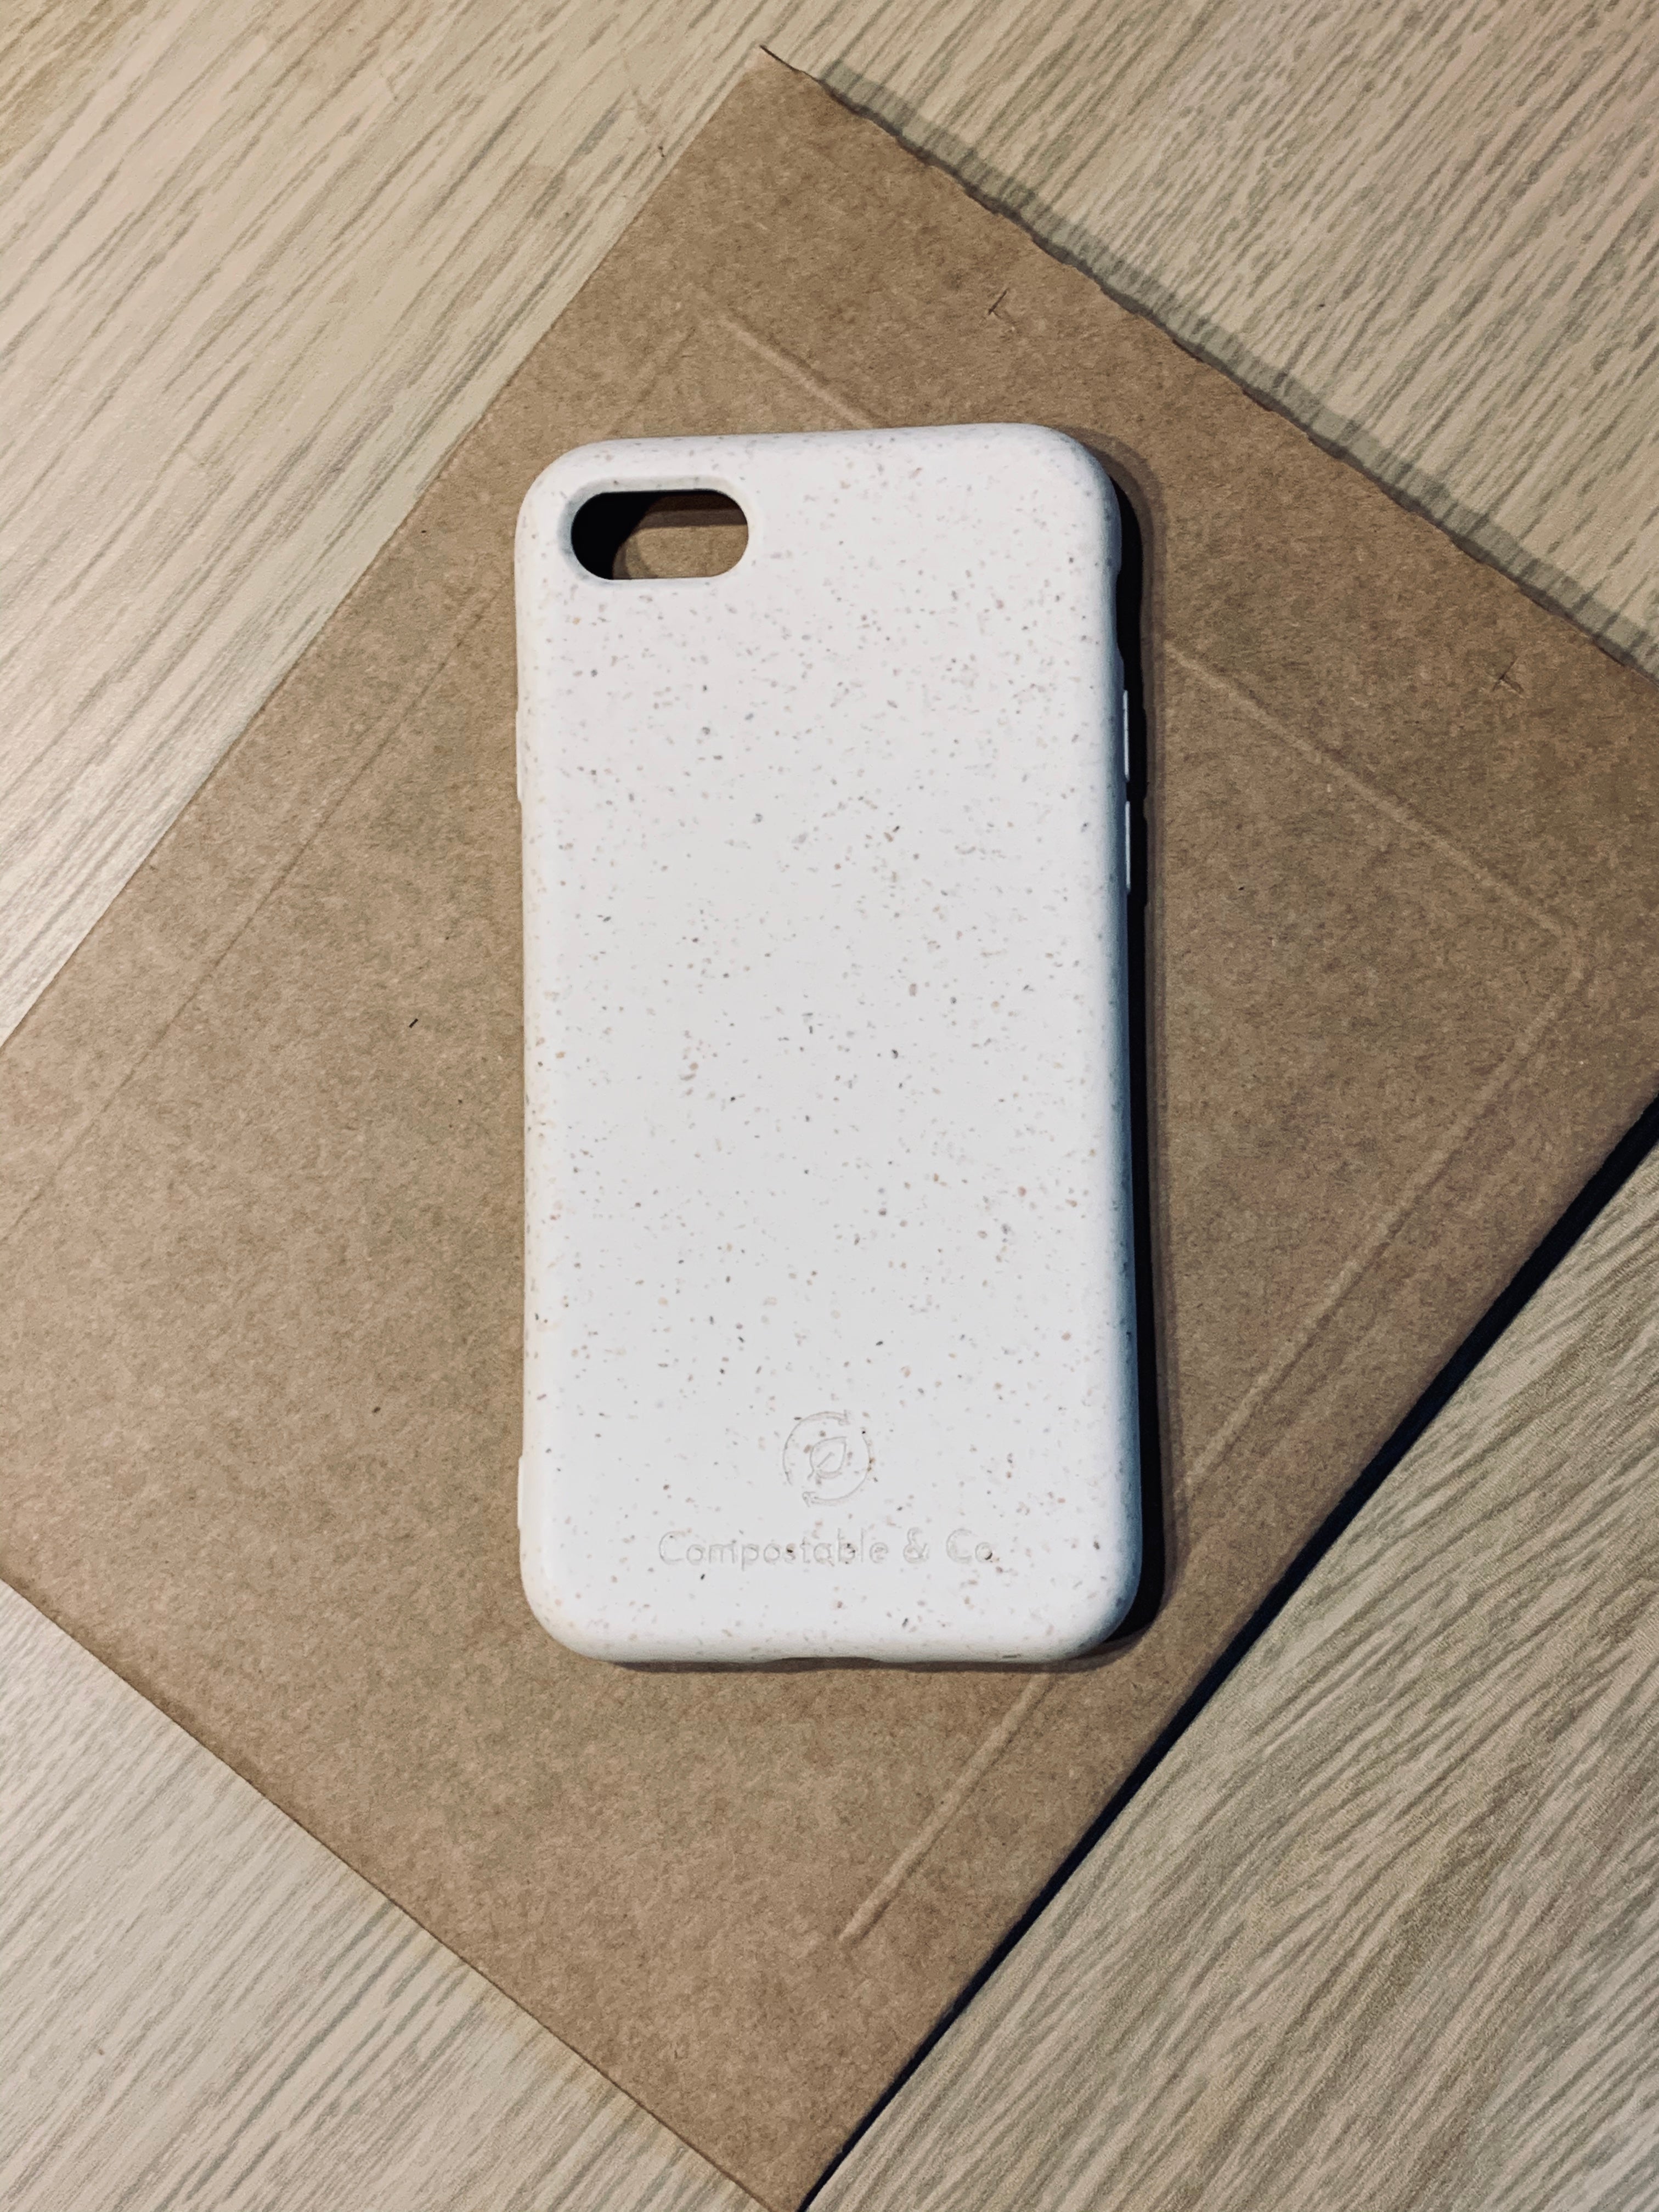 Compostable & Co. iPhone 7 / 8 / SE 2020 white biodegradable phone case with recycled paper background